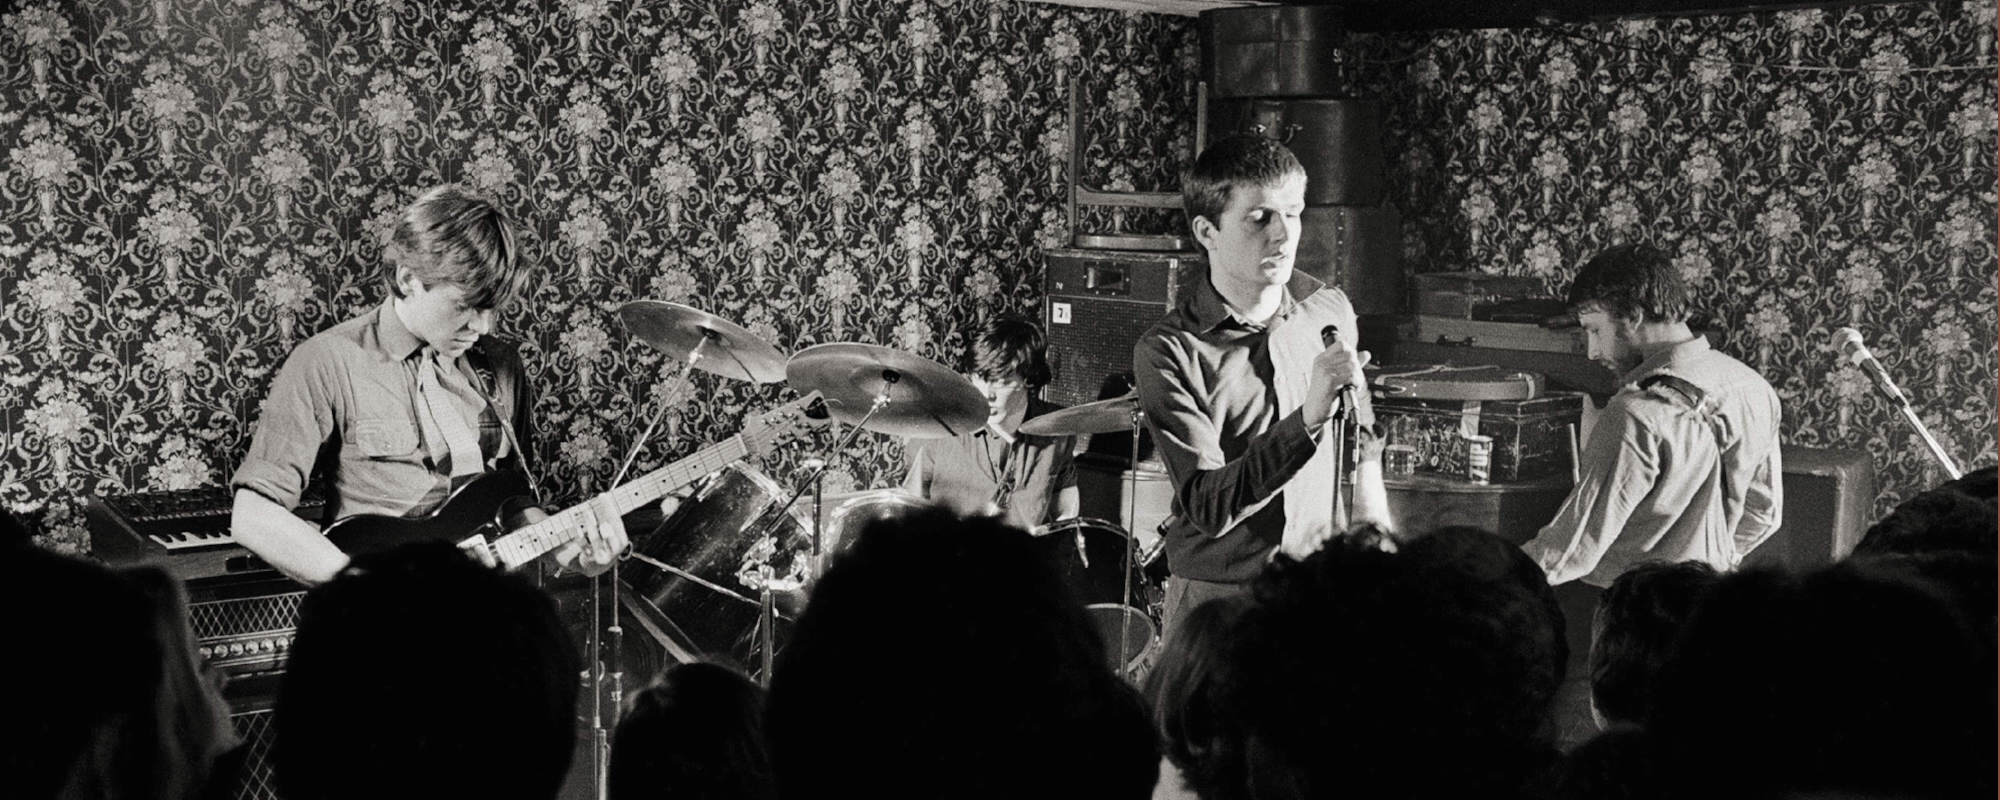 On This Day in Music History: Joy Division Make Their Live Debut